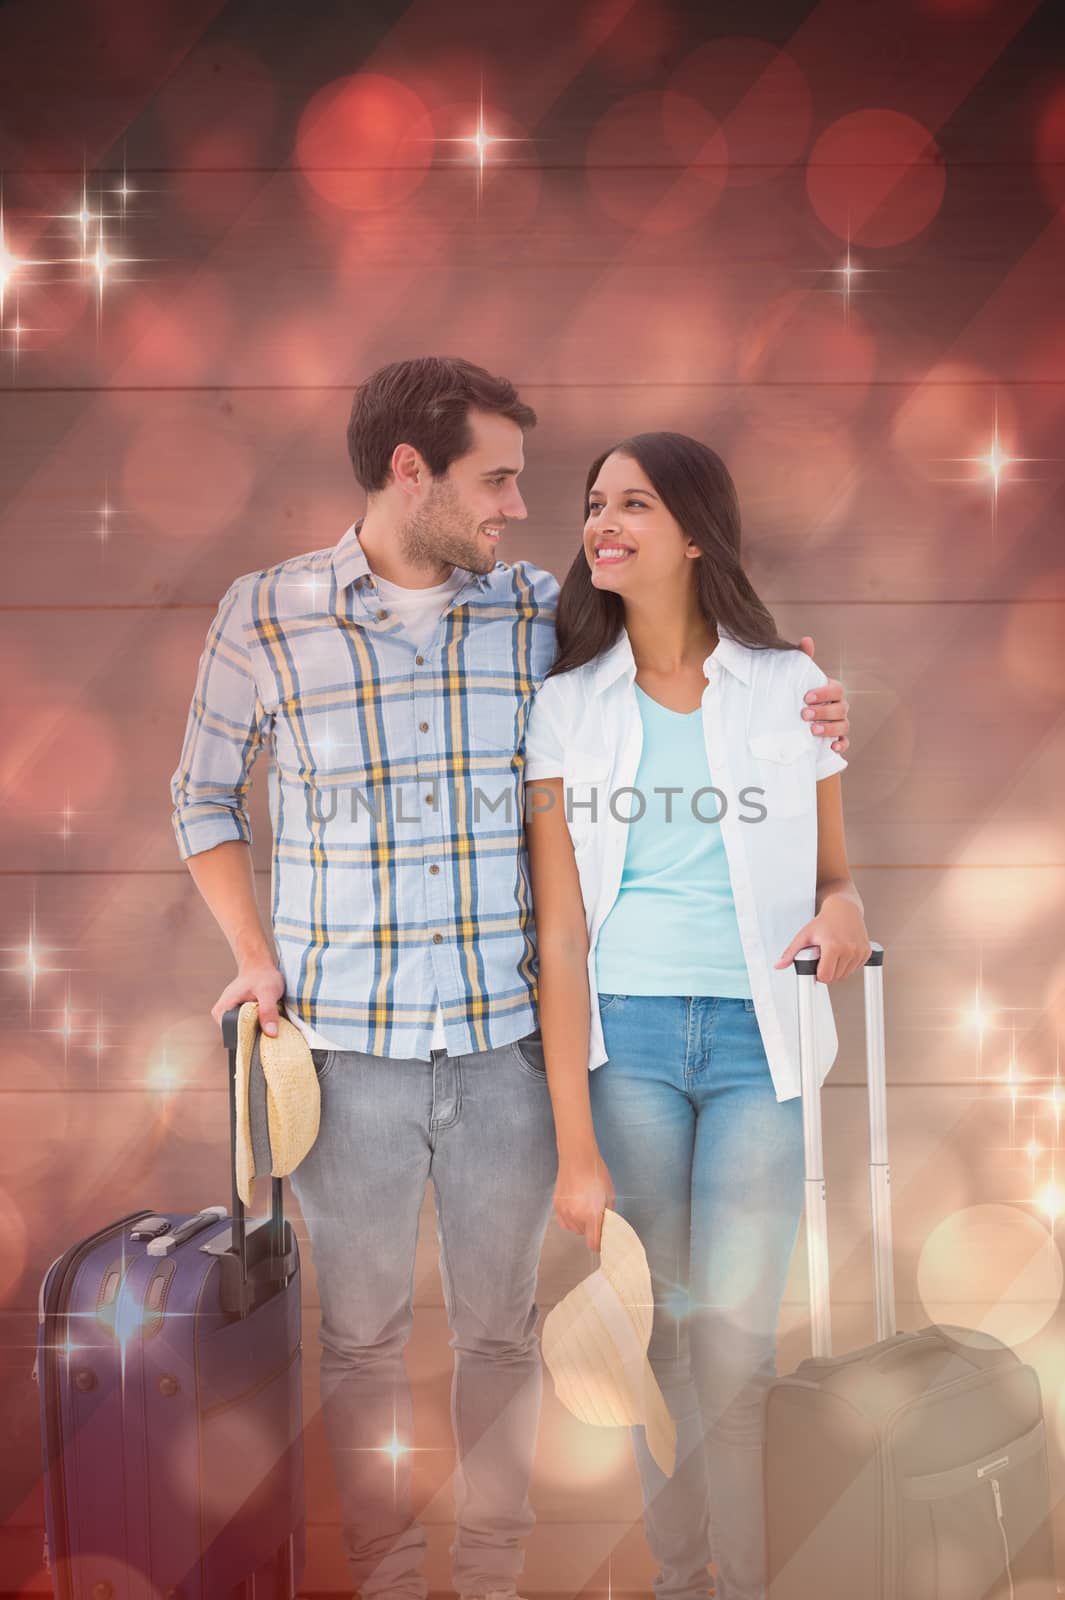 Attractive young couple going on their holidays against light design shimmering on red